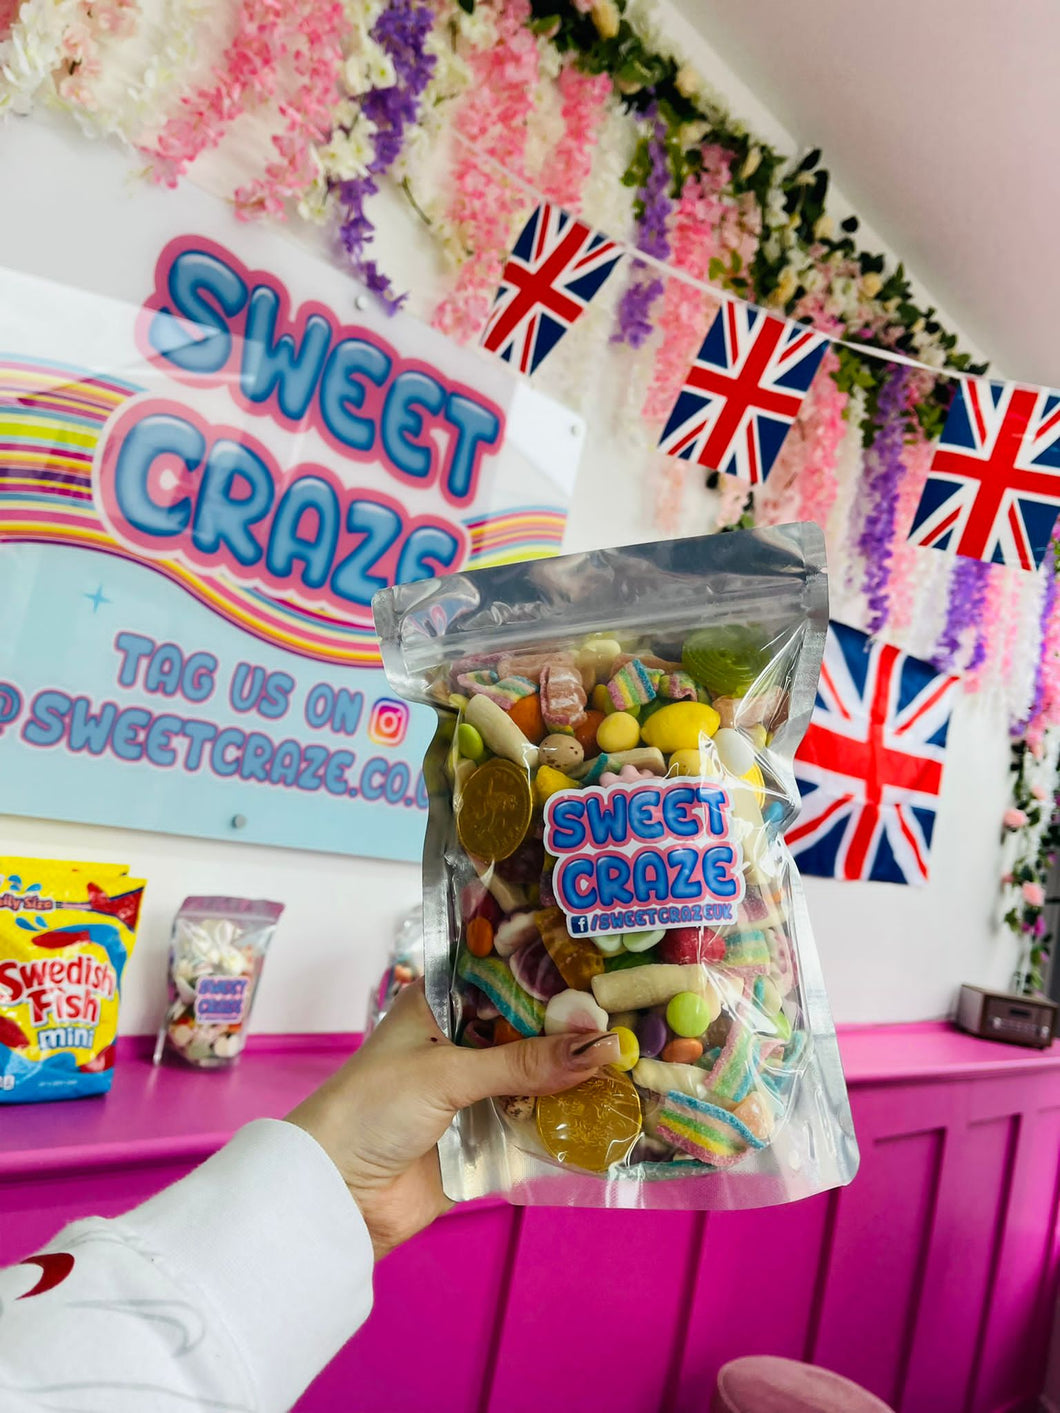 Pic N Mix - Chocolate Factory